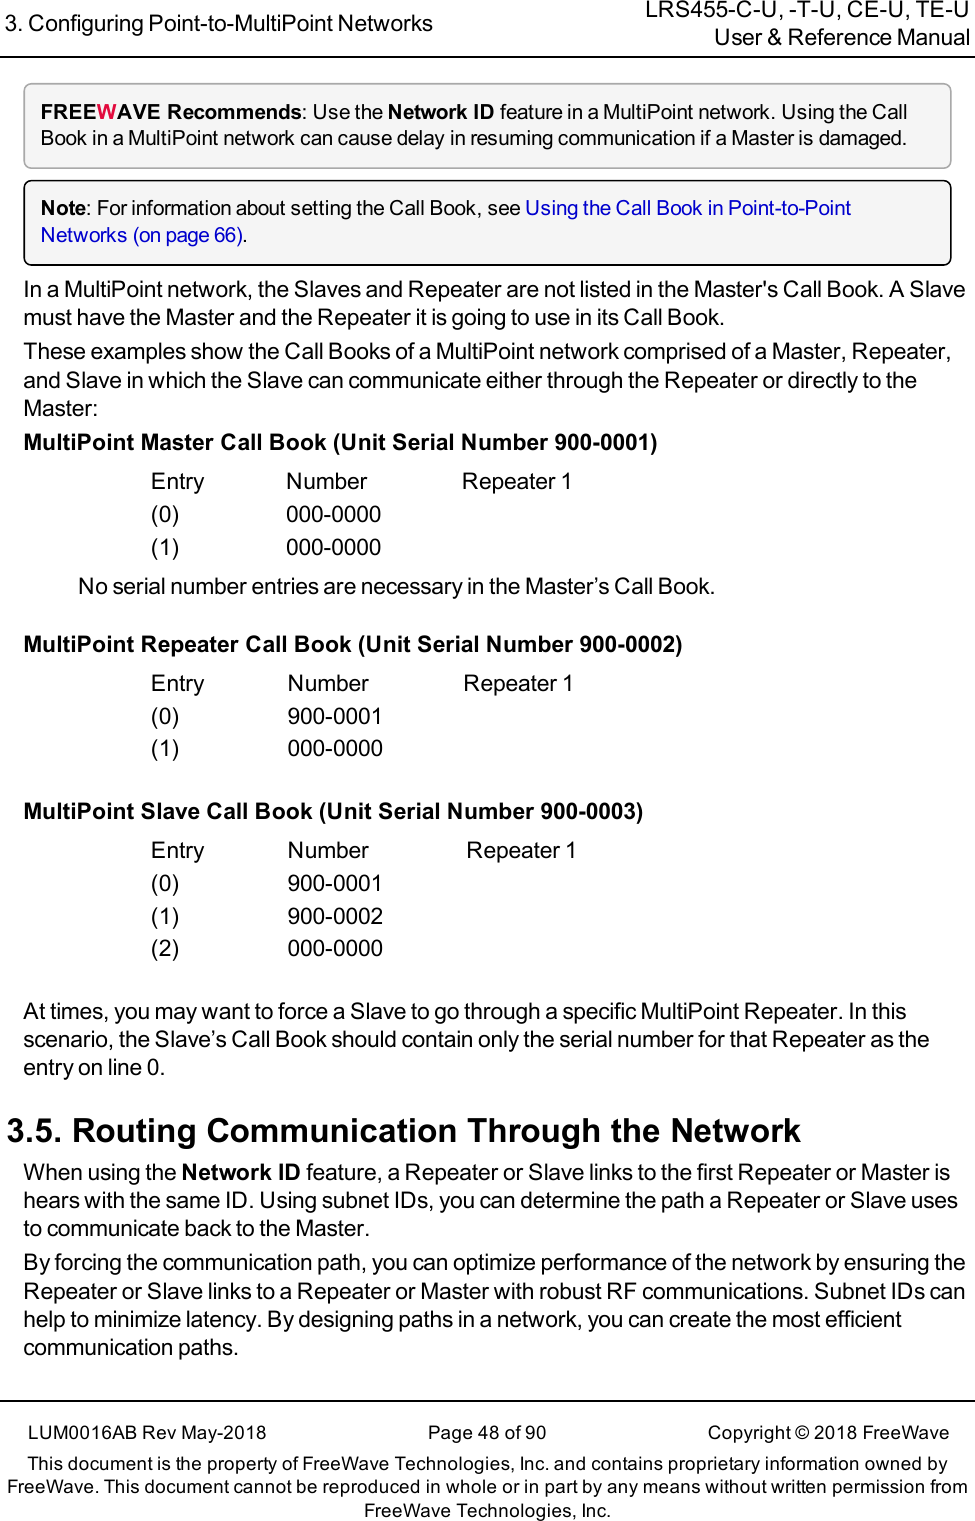 3. Configuring Point-to-MultiPoint Networks LRS455-C-U, -T-U, CE-U, TE-UUser &amp; Reference ManualLUM0016AB Rev May-2018 Page 48 of 90 Copyright © 2018FreeWaveThis document is the property of FreeWave Technologies, Inc. and contains proprietary information owned byFreeWave. This document cannot be reproduced in whole or in part by any means without written permission fromFreeWave Technologies, Inc.FREEWAVE Recommends: Use the Network ID feature in a MultiPoint network. Using the CallBook in a MultiPoint network can cause delay in resuming communication if a Master is damaged.Note: For information about setting the Call Book, see Using the Call Book in Point-to-PointNetworks (on page 66).In a MultiPoint network, the Slaves and Repeater are not listed in the Master&apos;s Call Book. A Slavemust have the Master and the Repeater it is going to use in its Call Book.These examples show the Call Books of a MultiPoint network comprised of a Master, Repeater,and Slave in which the Slave can communicate either through the Repeater or directly to theMaster:MultiPoint Master Call Book (Unit Serial Number 900-0001)Entry Number Repeater 1(0) 000-0000(1) 000-0000No serial number entries are necessary in the Master’s Call Book.MultiPoint Repeater Call Book (Unit Serial Number 900-0002)Entry Number Repeater 1(0) 900-0001(1) 000-0000MultiPoint Slave Call Book (Unit Serial Number 900-0003)Entry Number Repeater 1(0) 900-0001(1) 900-0002(2) 000-0000At times, you may want to force a Slave to go through a specific MultiPoint Repeater. In thisscenario, the Slave’s Call Book should contain only the serial number for that Repeater as theentry on line 0.3.5. Routing Communication Through the NetworkWhen using the Network ID feature, a Repeater or Slave links to the first Repeater or Master ishears with the same ID. Using subnet IDs, you can determine the path a Repeater or Slave usesto communicate back to the Master.By forcing the communication path, you can optimize performance of the network by ensuring theRepeater or Slave links to a Repeater or Master with robust RF communications. Subnet IDs canhelp to minimize latency. By designing paths in a network, you can create the most efficientcommunication paths.